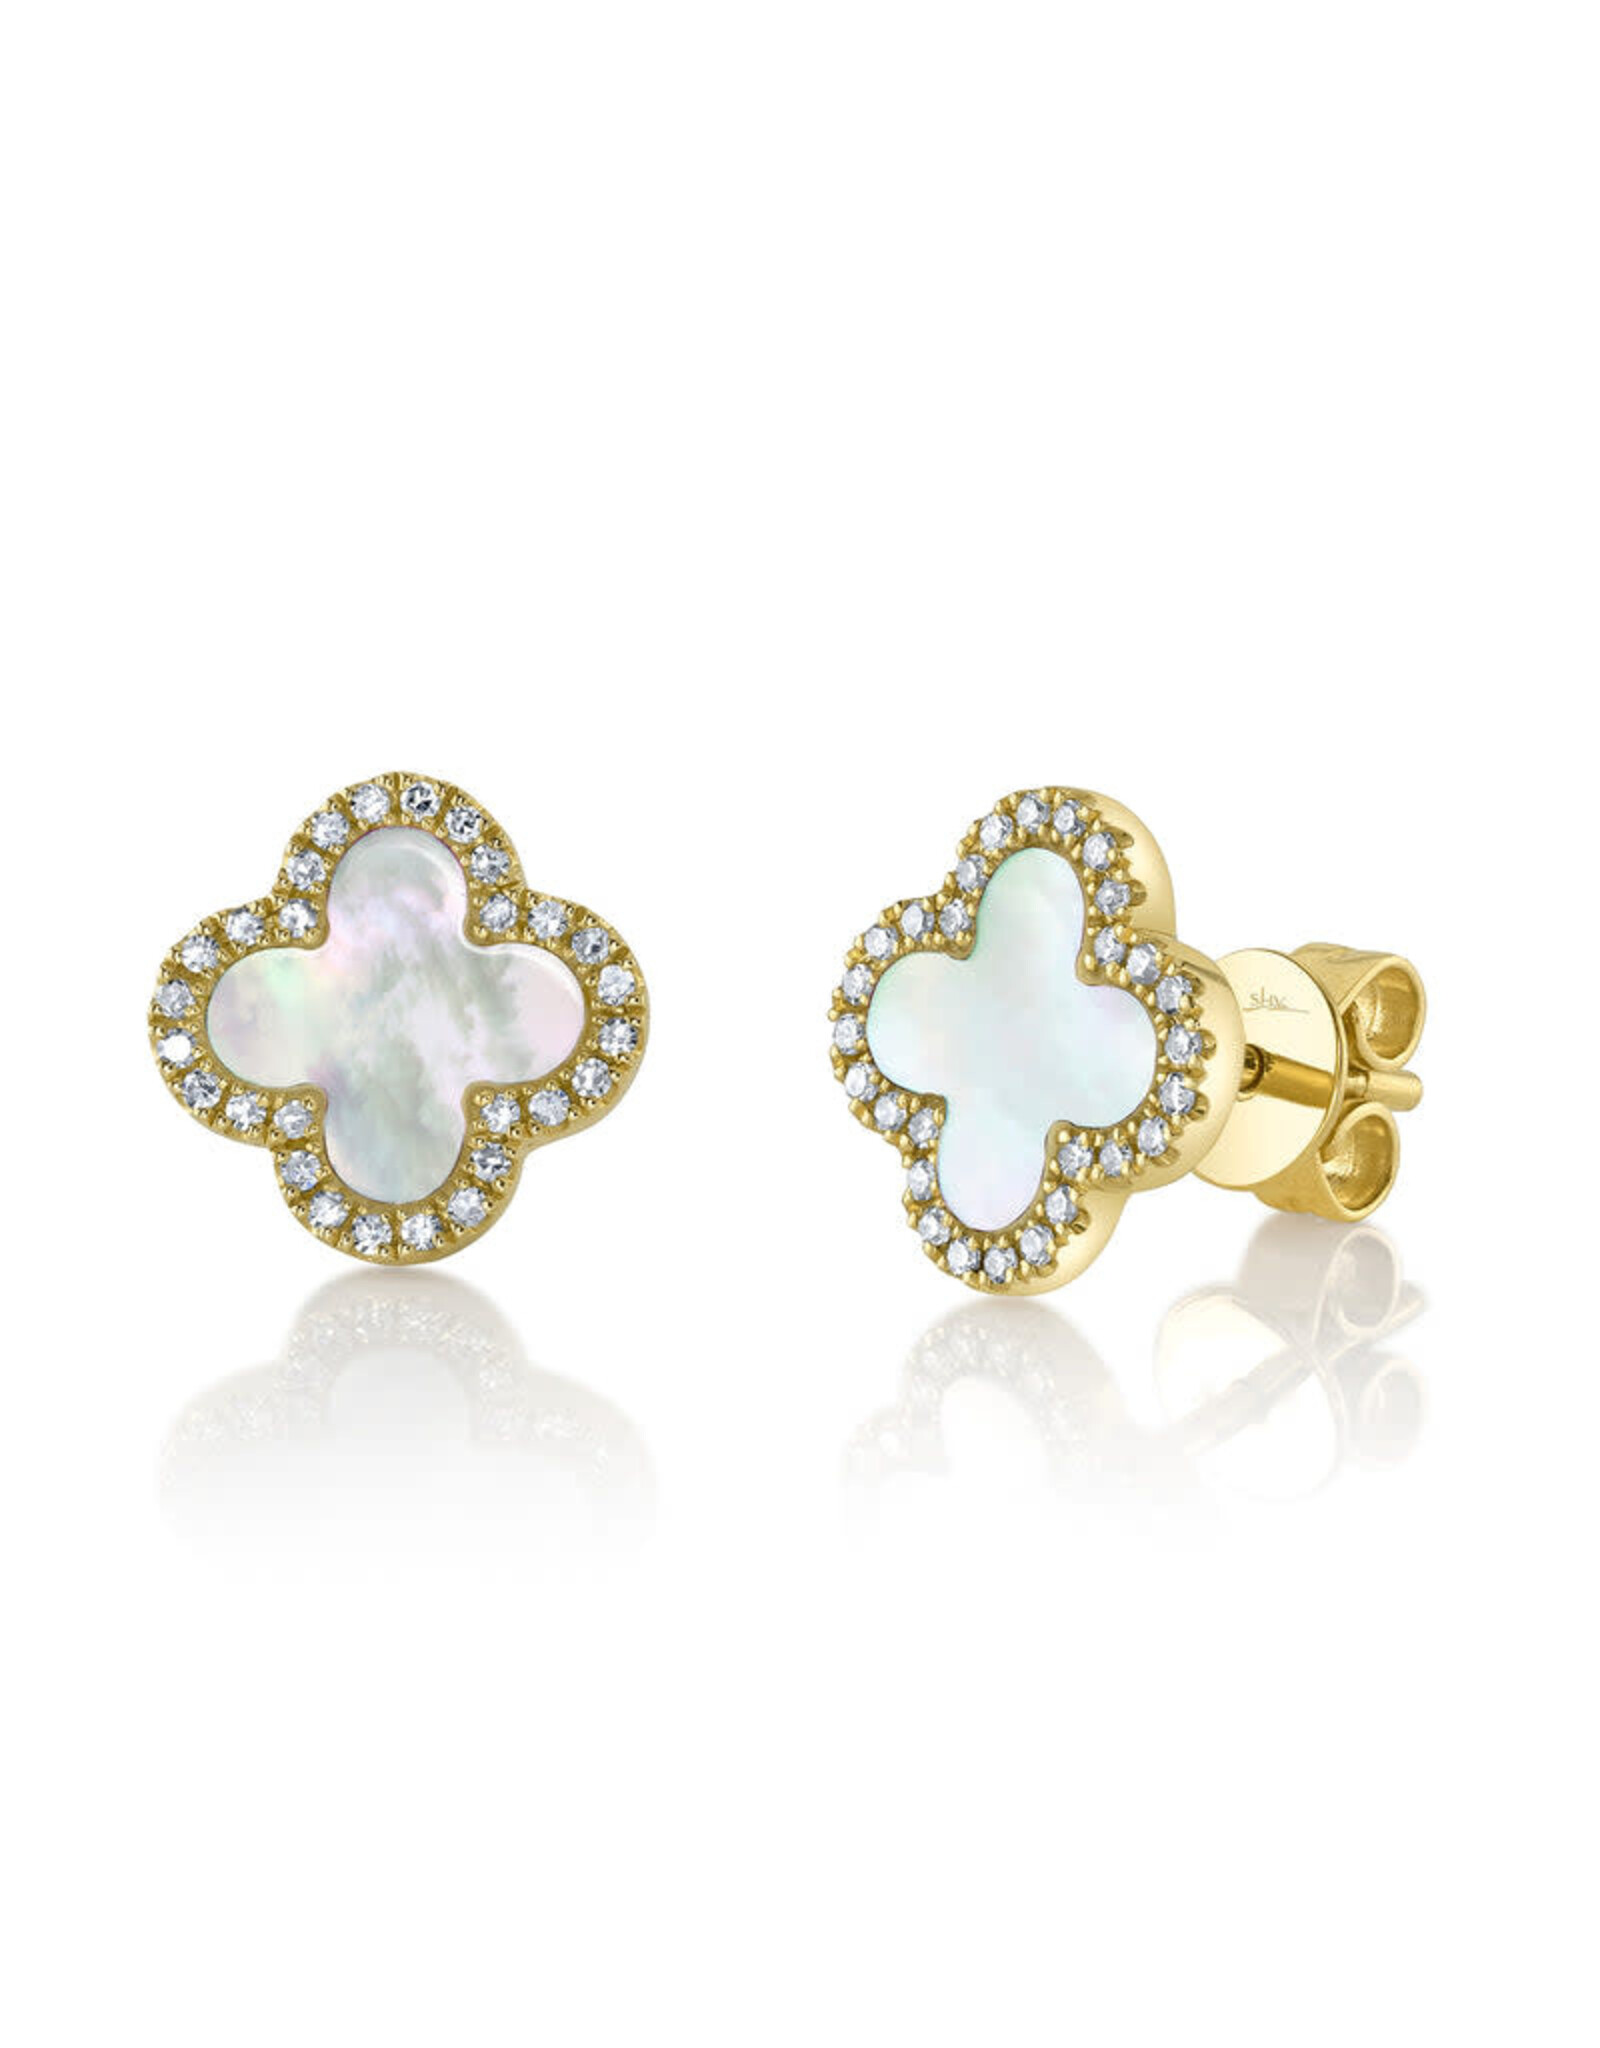 14K Yellow Gold Mother of Pearl Clover Earrings, MP: 0.80ct, D: 0.15ct